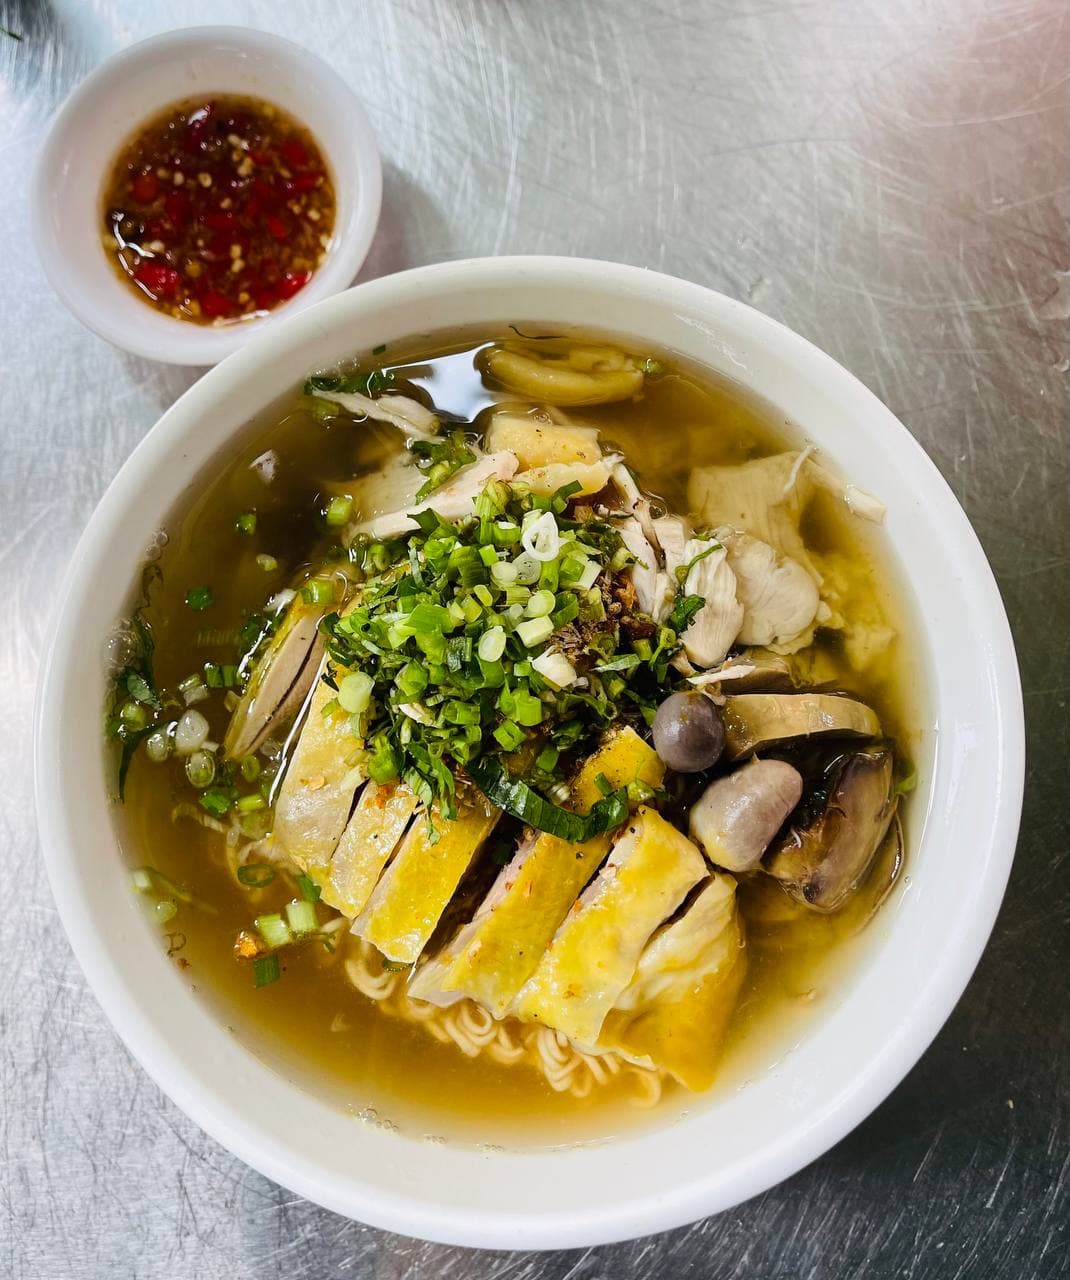 02.Noodle Soup with Chicken Drumstick and Organs